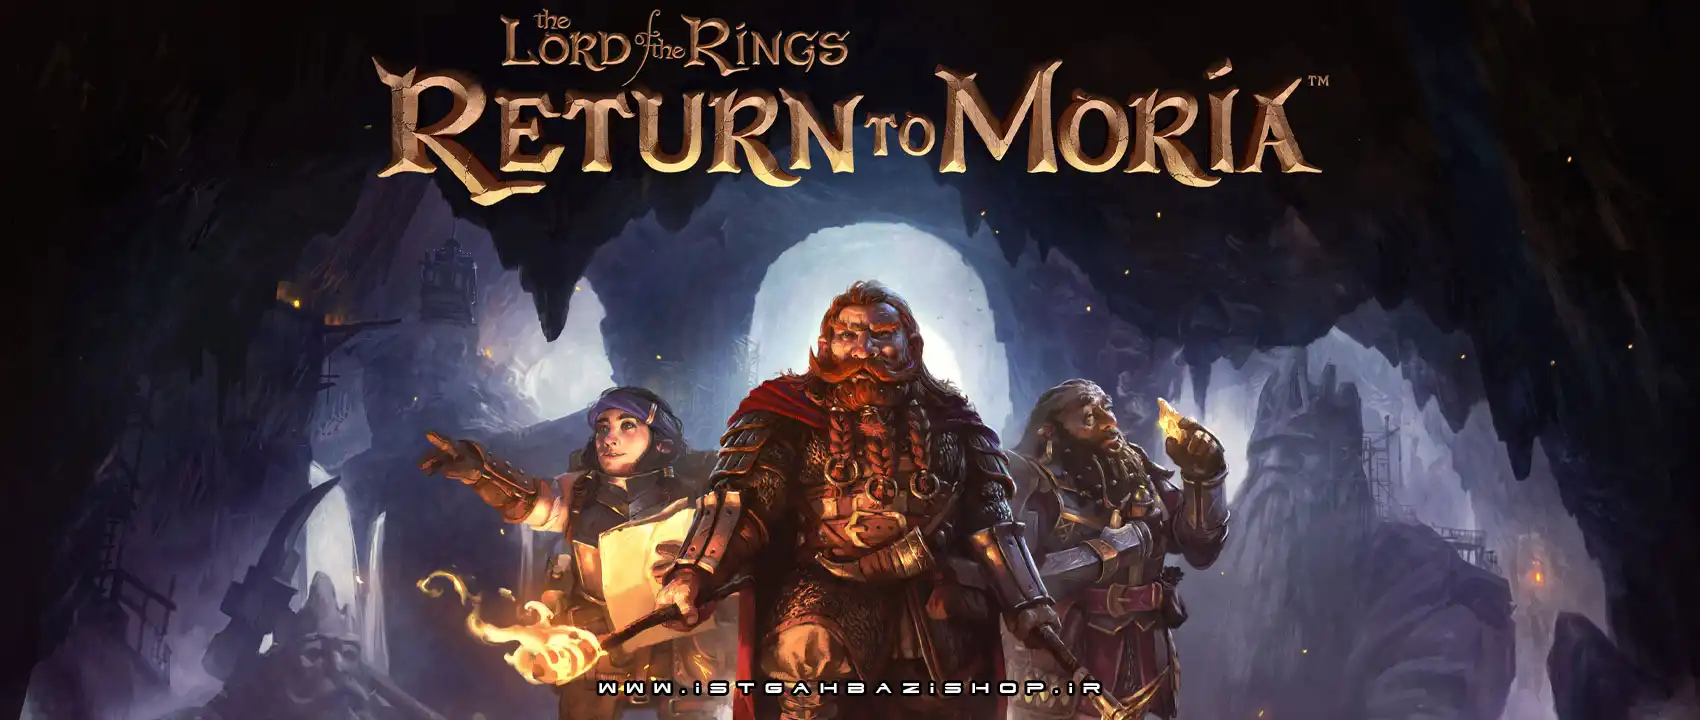 The Lord of the Rings Return to Moria Ps4